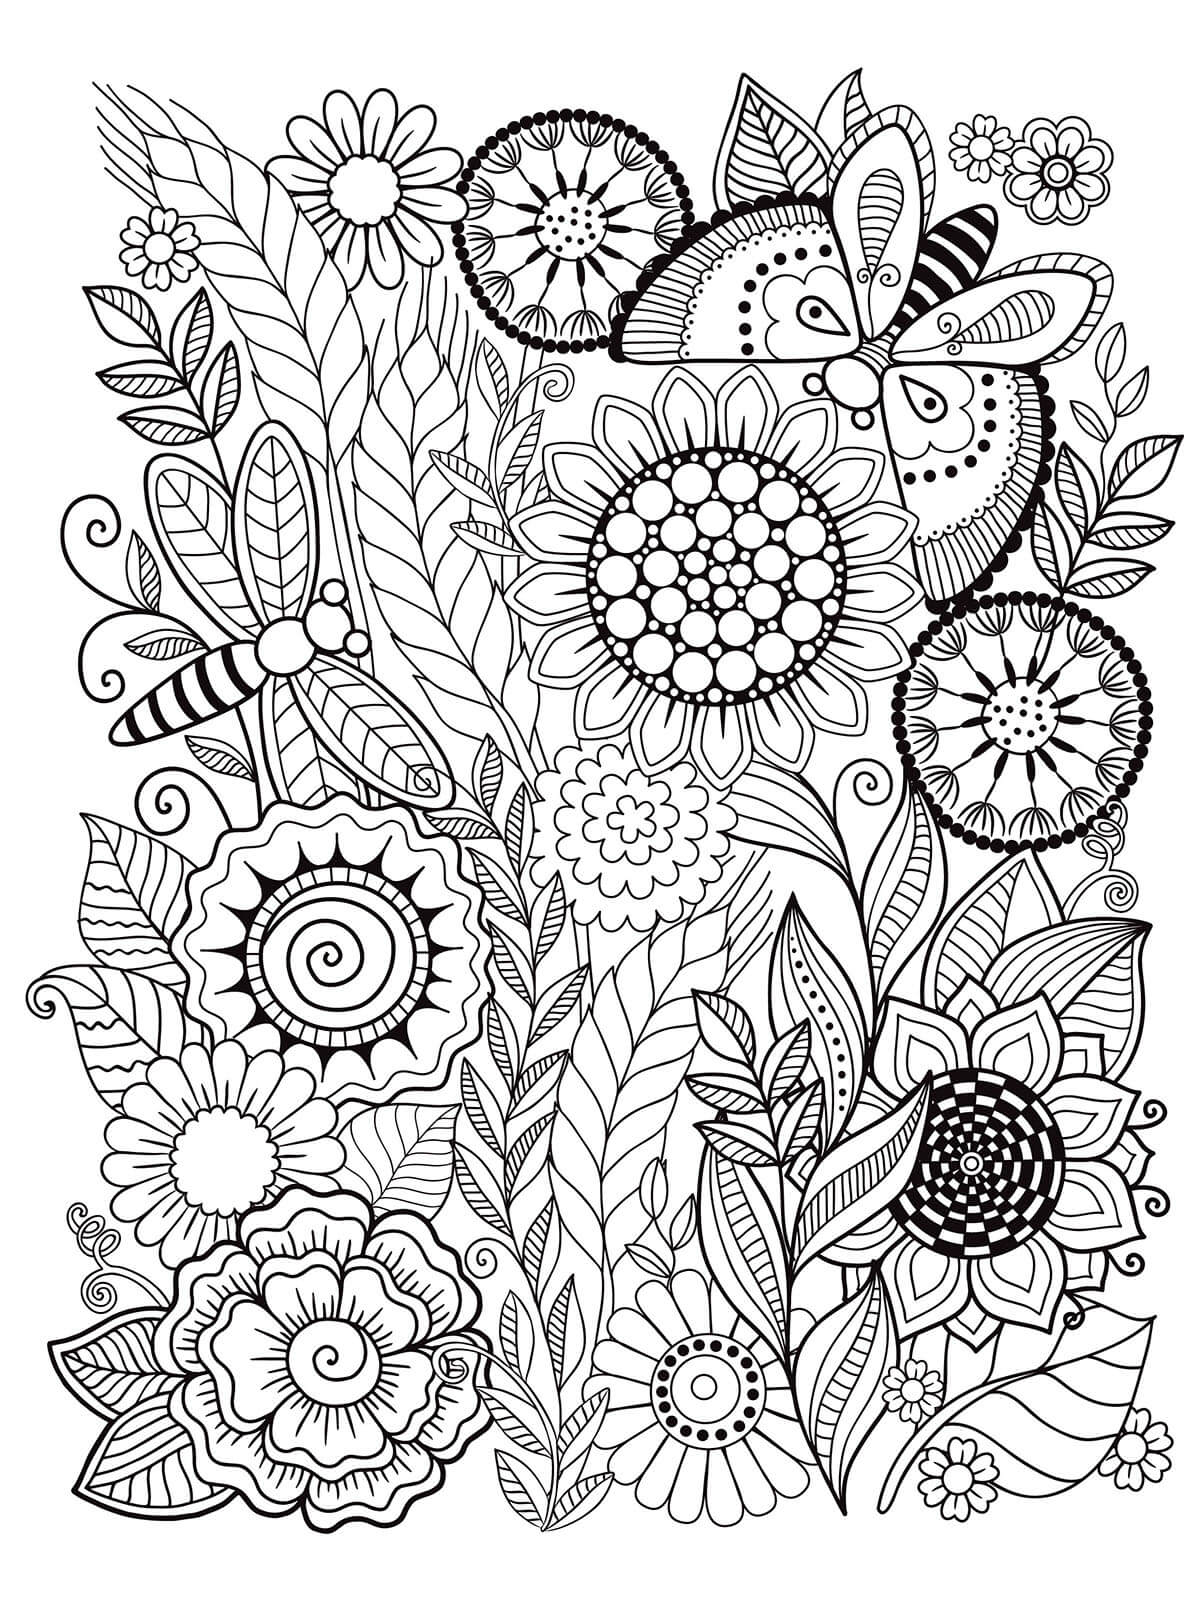 Cool Flower Mindfulness 3 Coloring Page